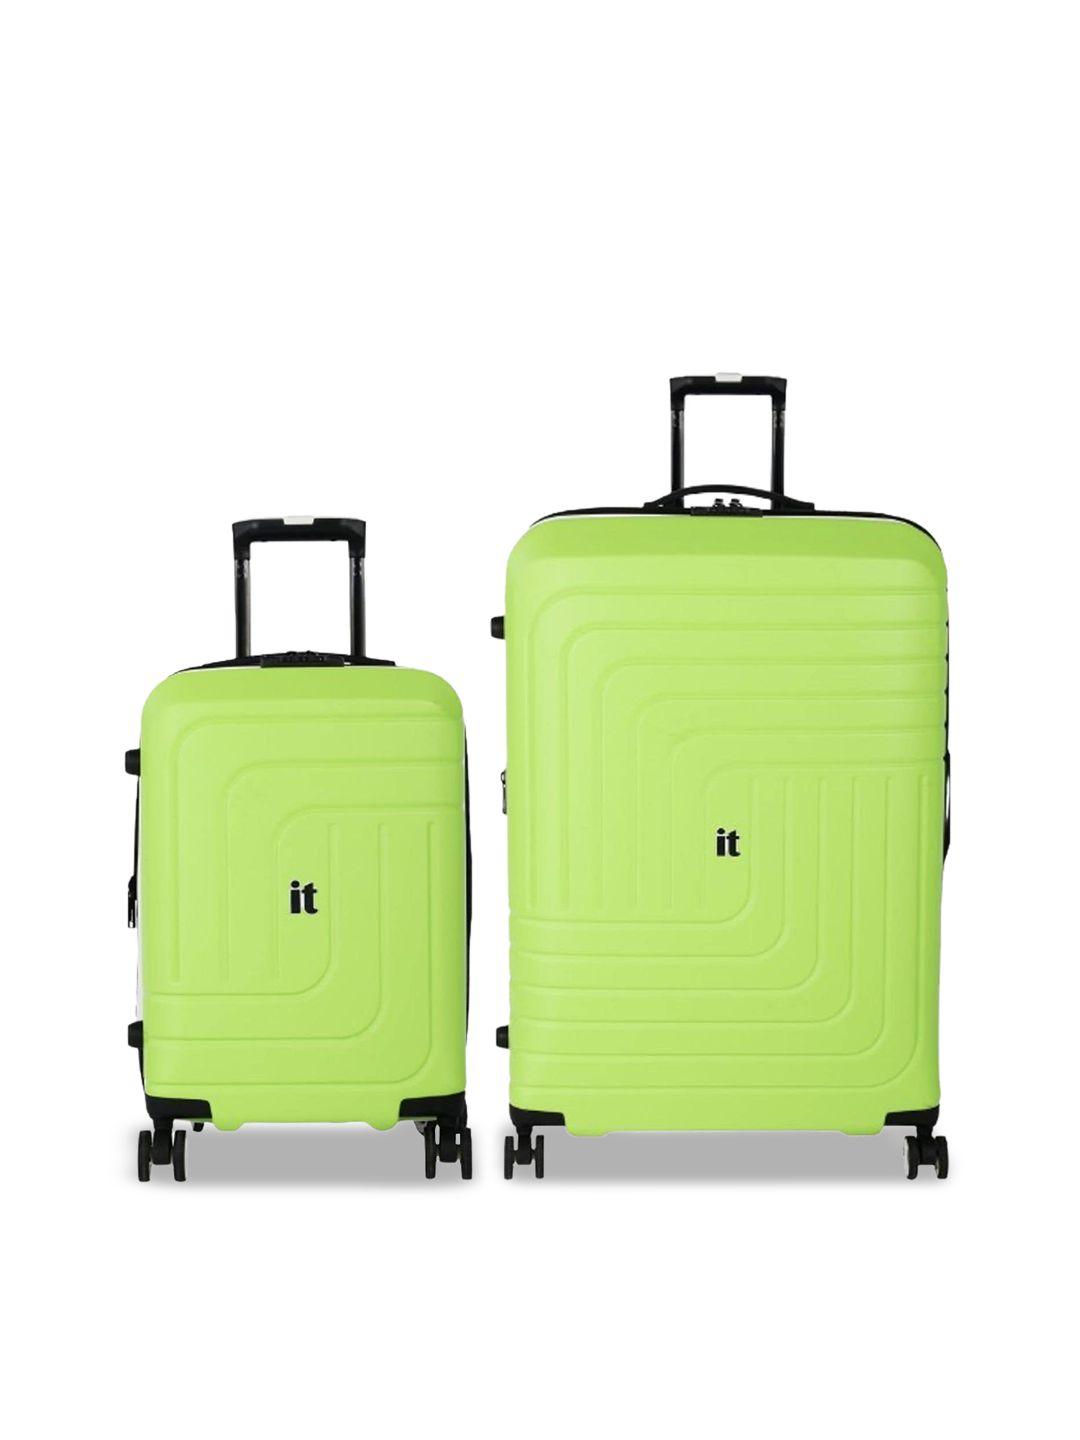 it luggage set of 2 convolved textured 28 inches hard-sided trolley suitcases